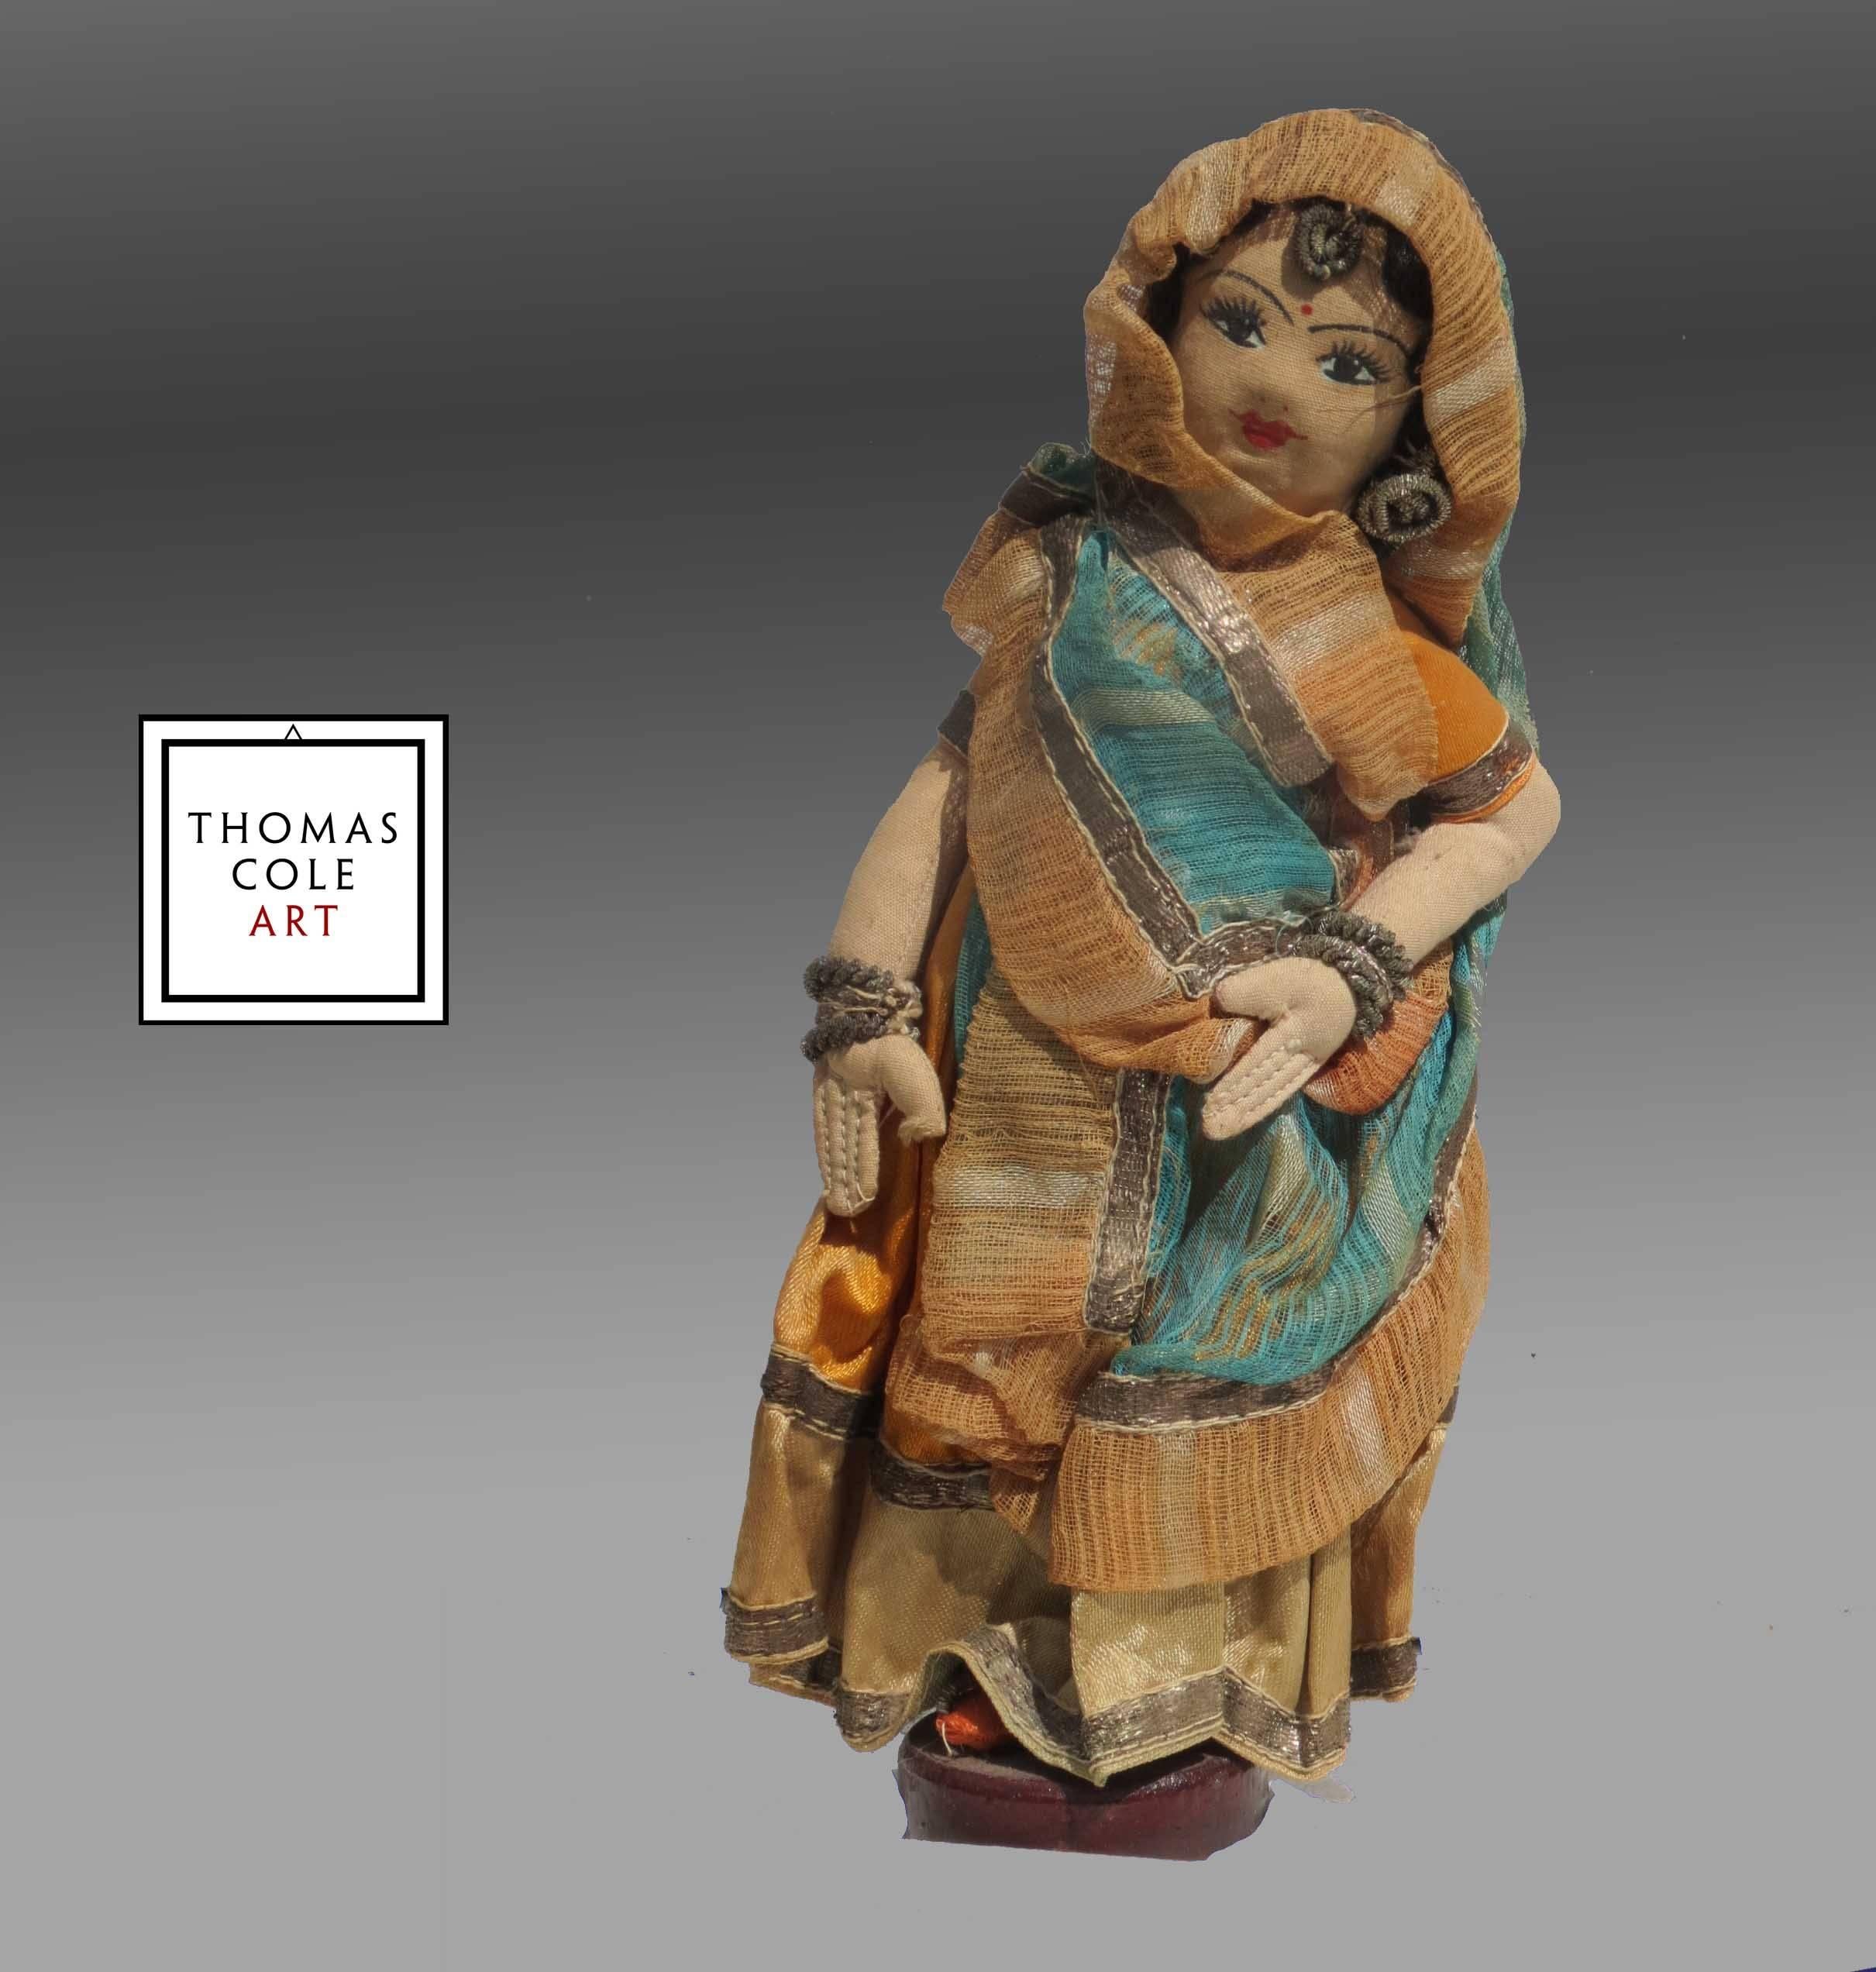 This finely made antique doll in immaculate condition was purchased by Samuel Rosenbaum (San Francisco) on a trip to India spanning the years 1910-1912. He was of the 